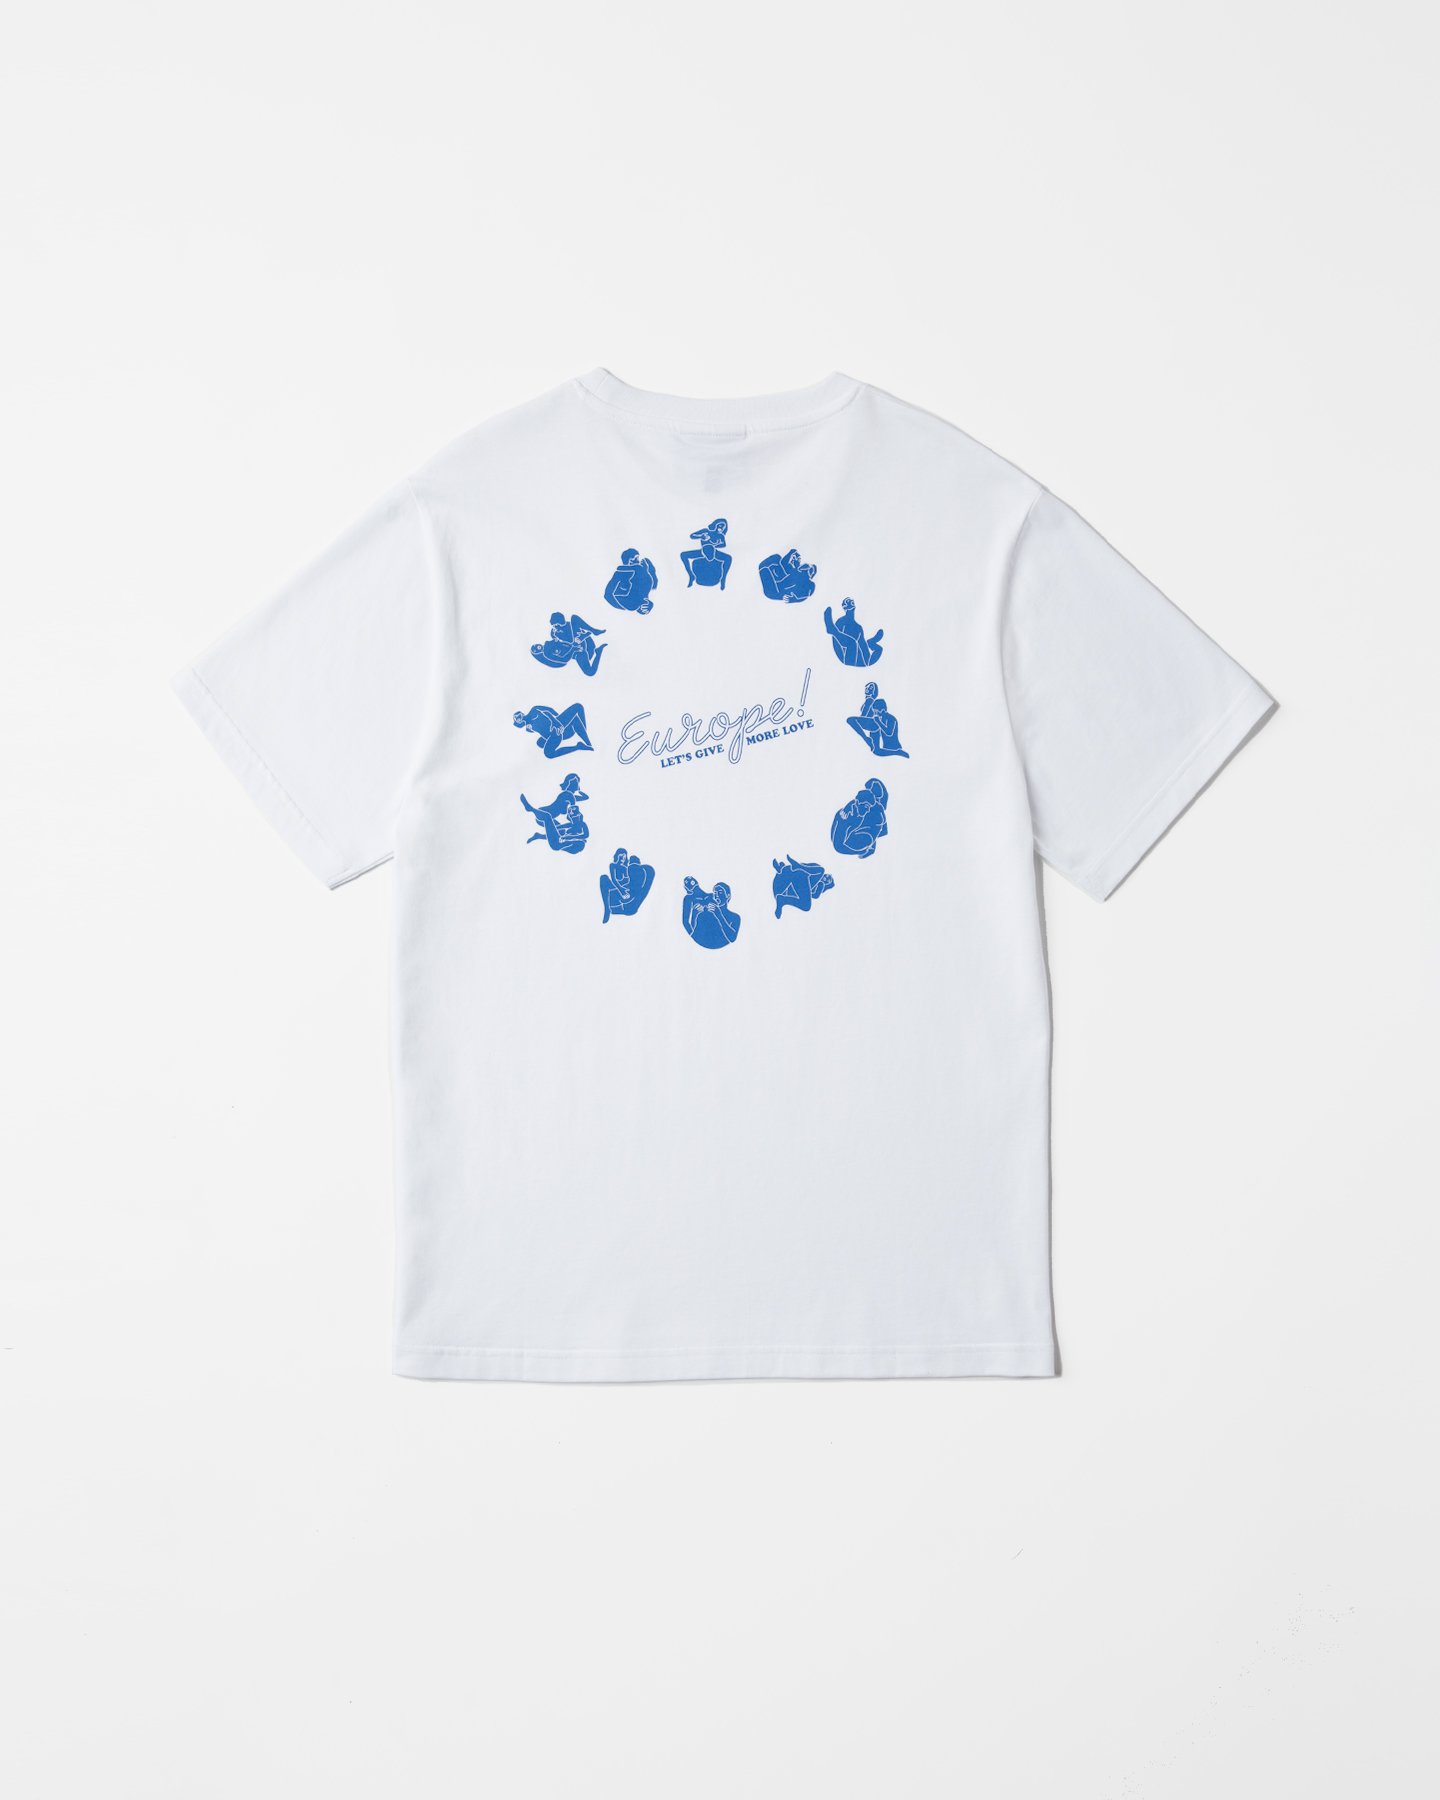 Carne Bollente – Let's Give More Love T-Shirt White | Highsnobiety Shop